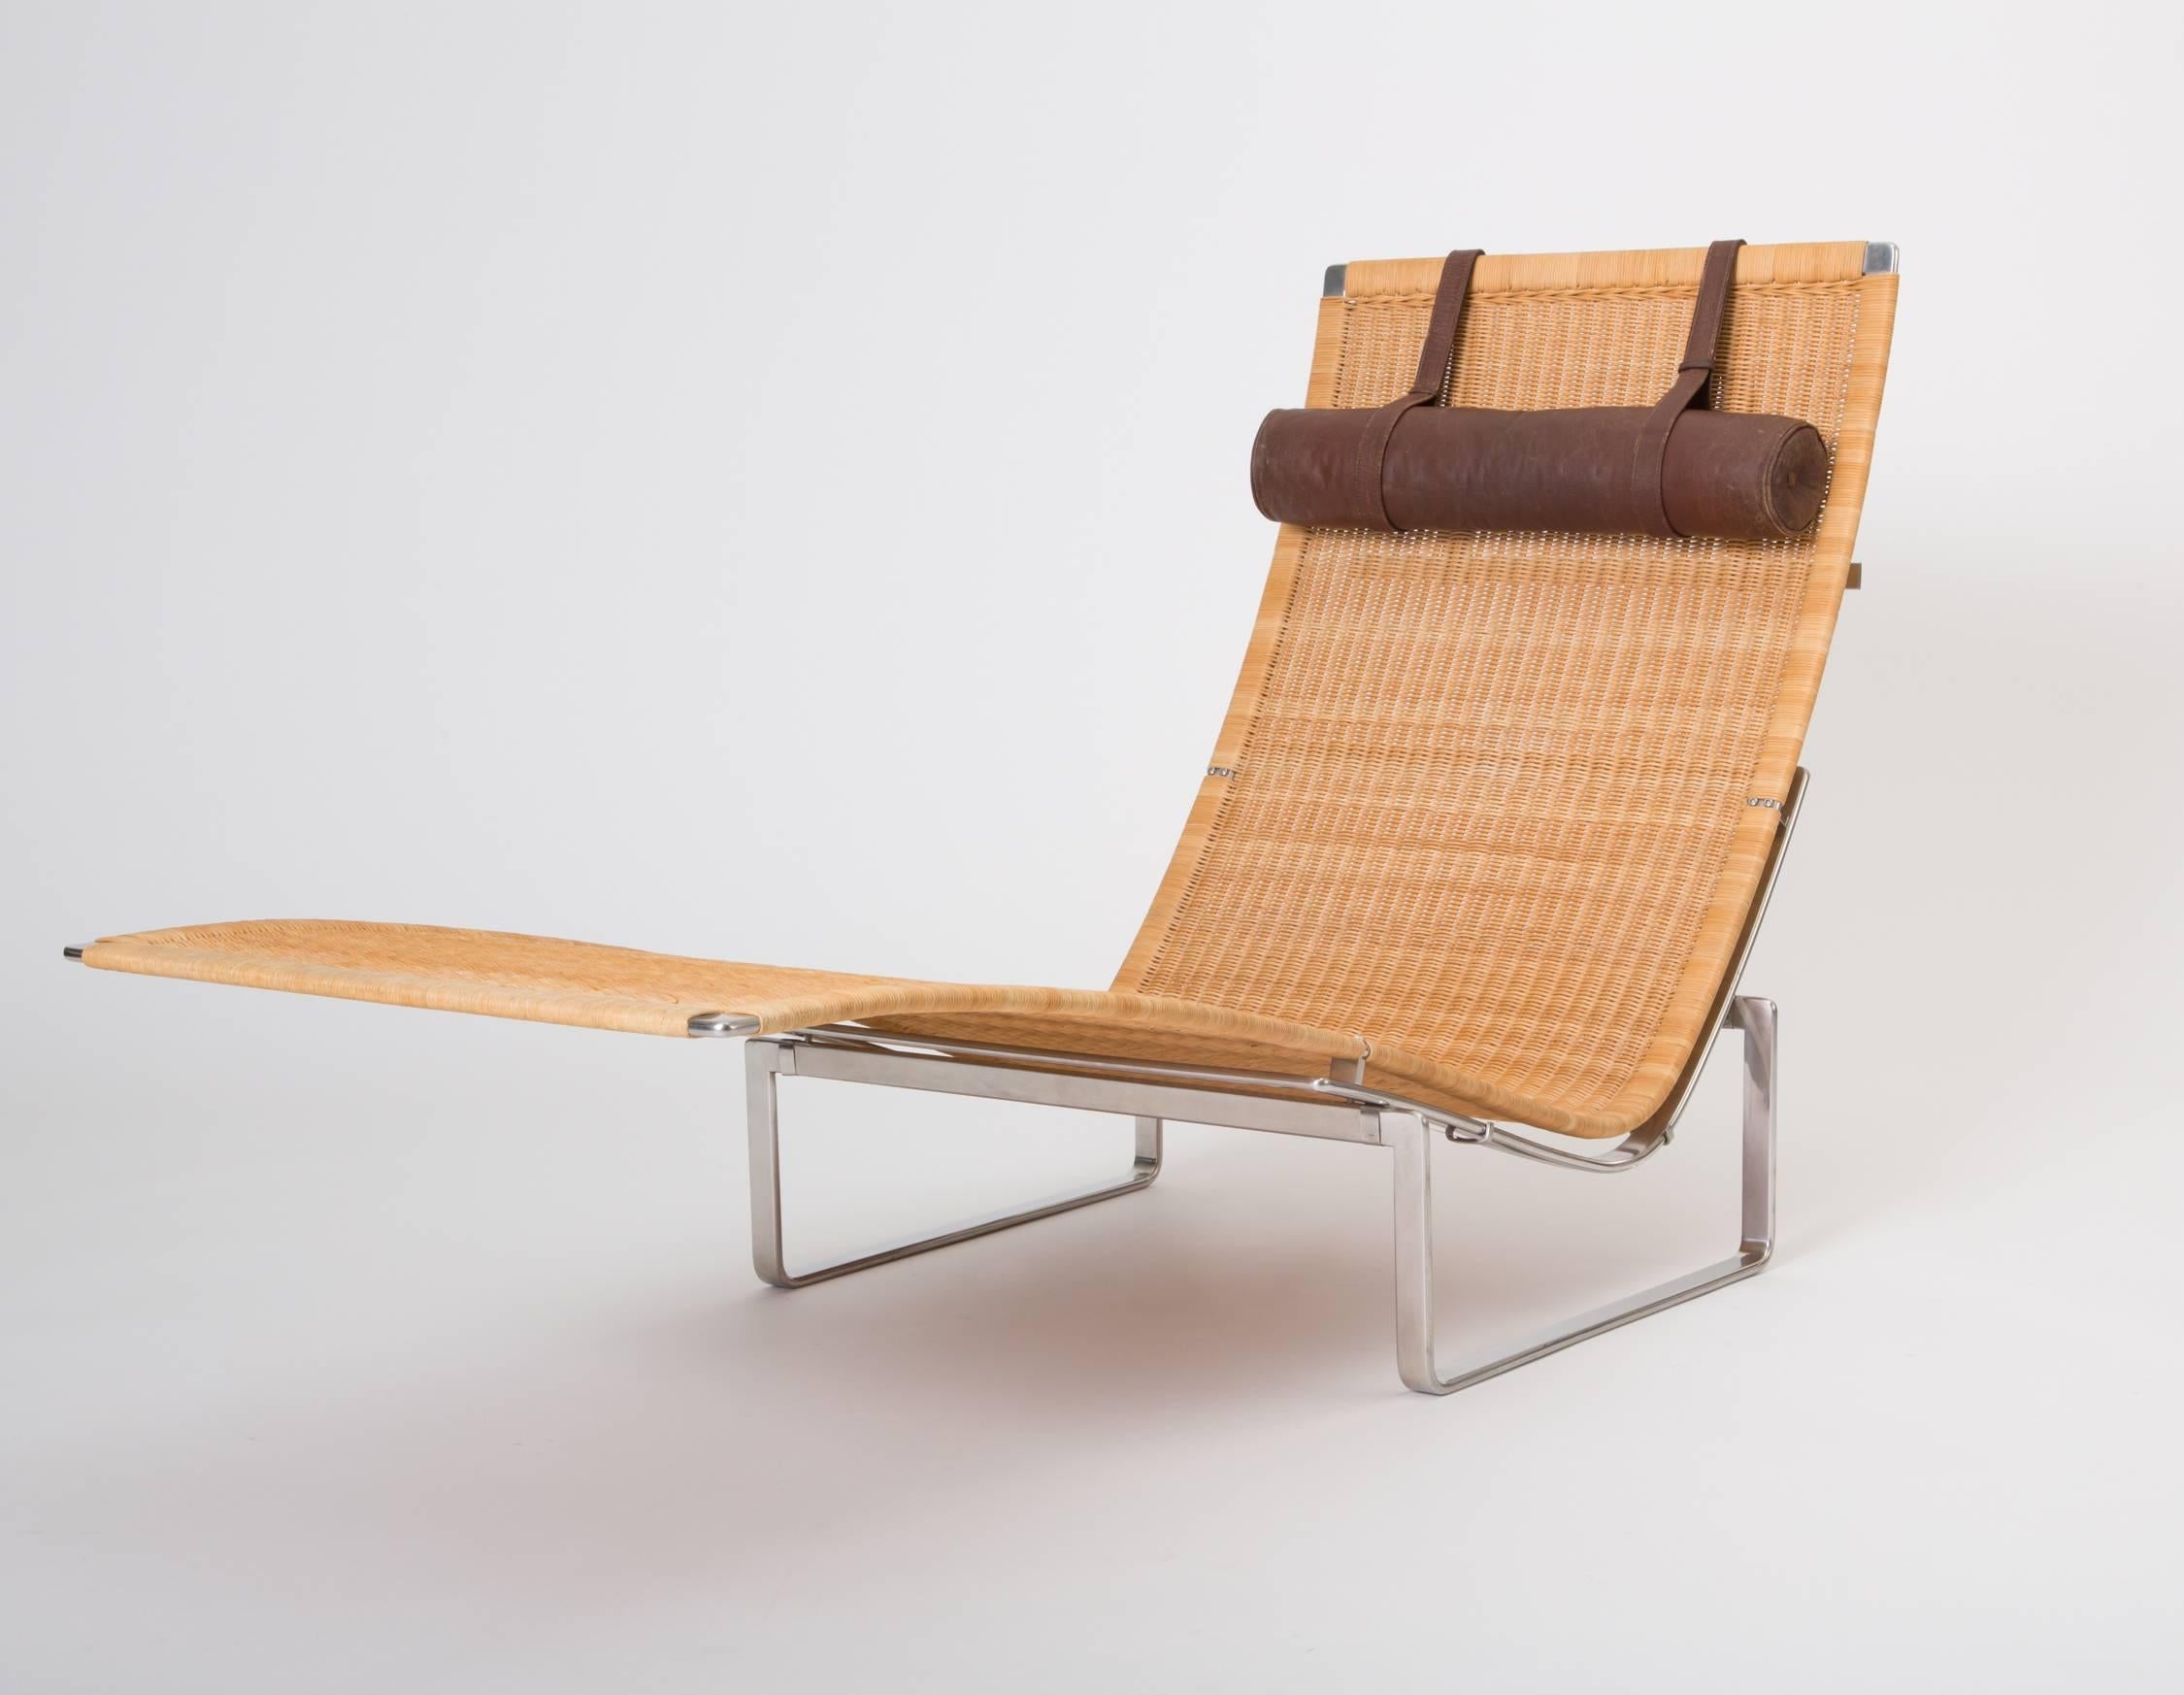 Mid-20th Century Poul Kjaerholm PK 24 Chaise Lounge with Wicker Seat